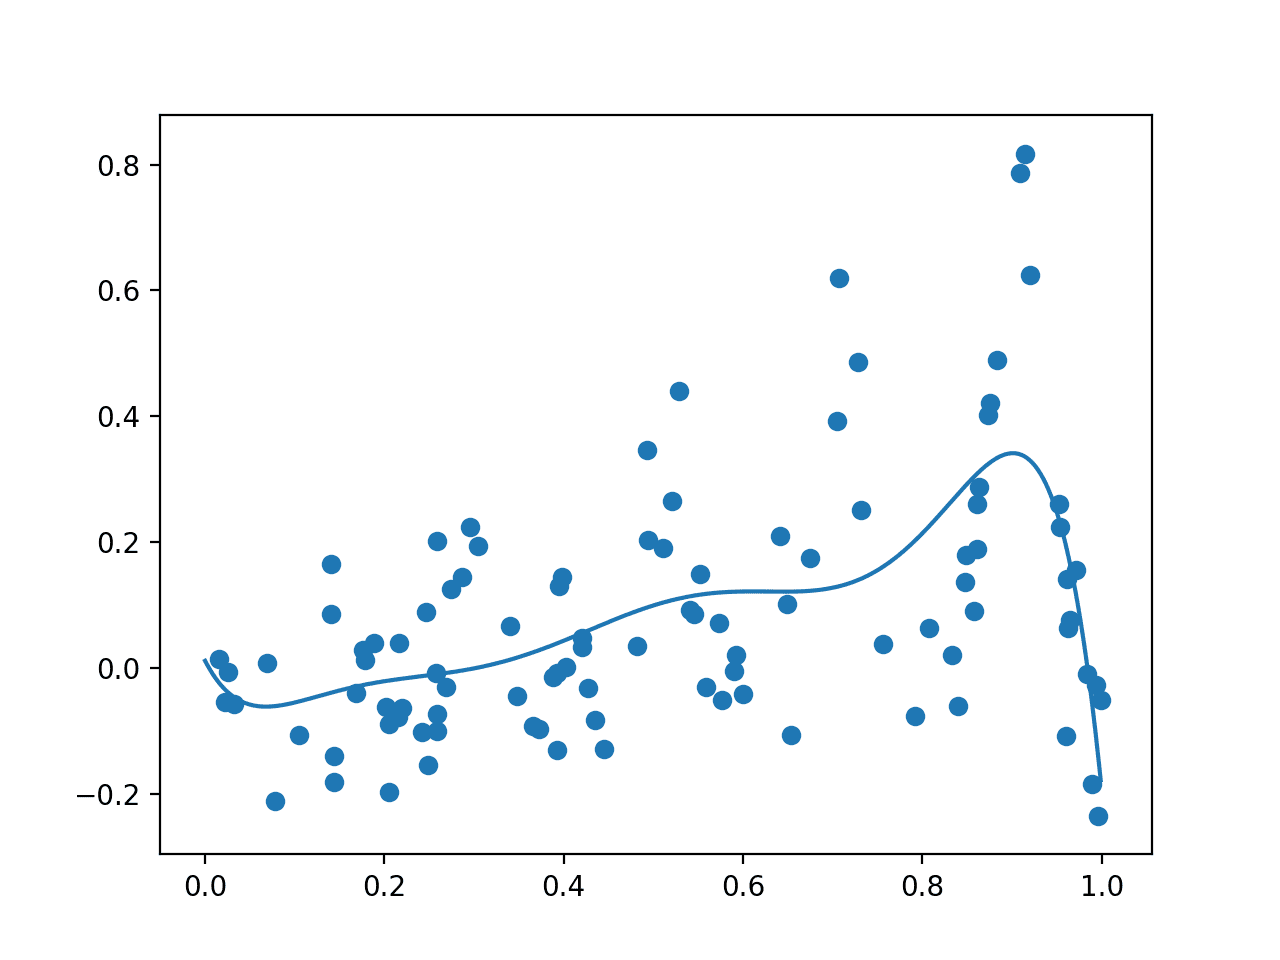 Plot Showing Random Sample With Noisy Evaluation (dots) and Surrogate Function Across the Domain (line).